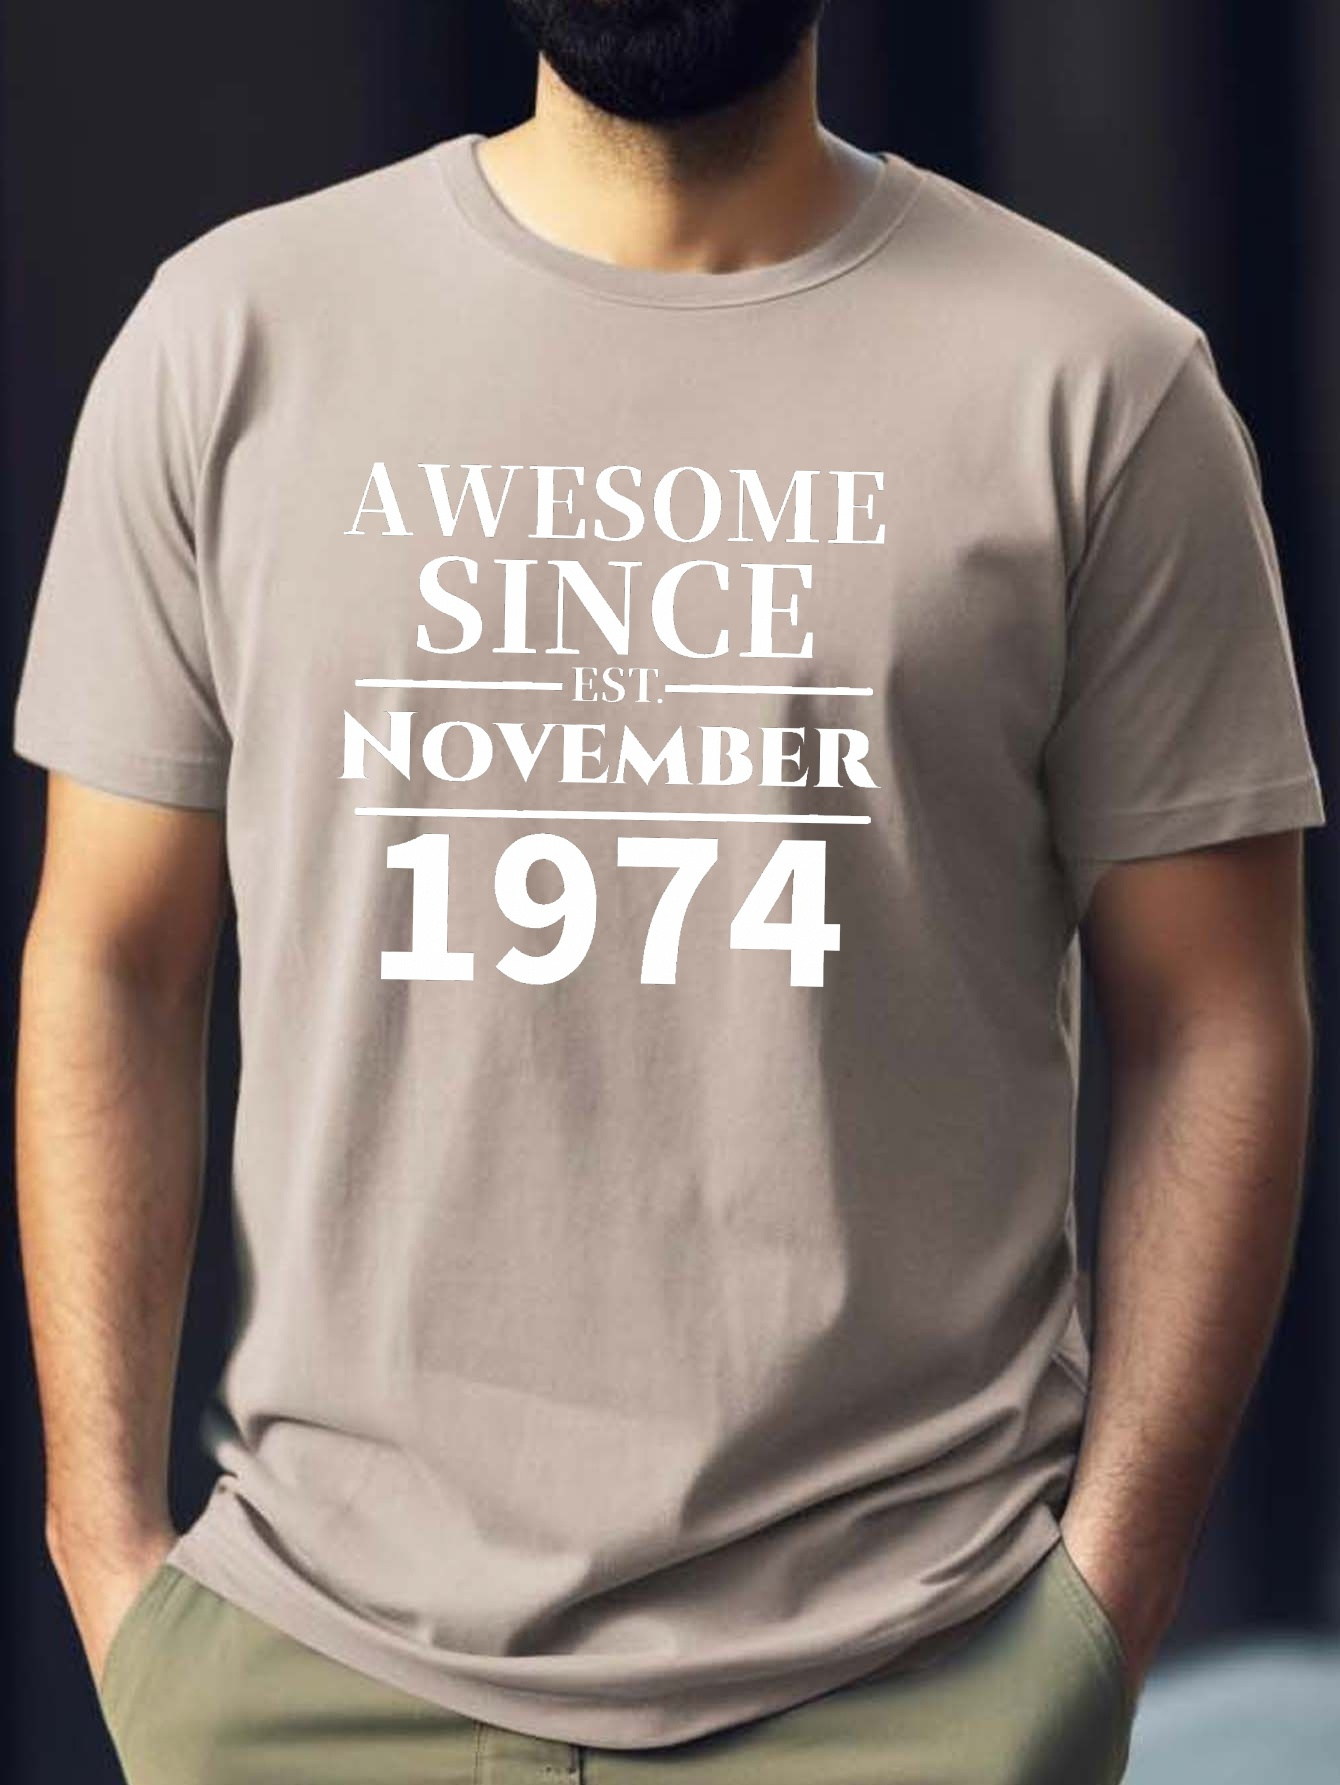 AWESOME SINCE NOVEMBER 1974 Print Tee Shirt, Tees For Men, Casual Short Sleeve T-shirt For Summer